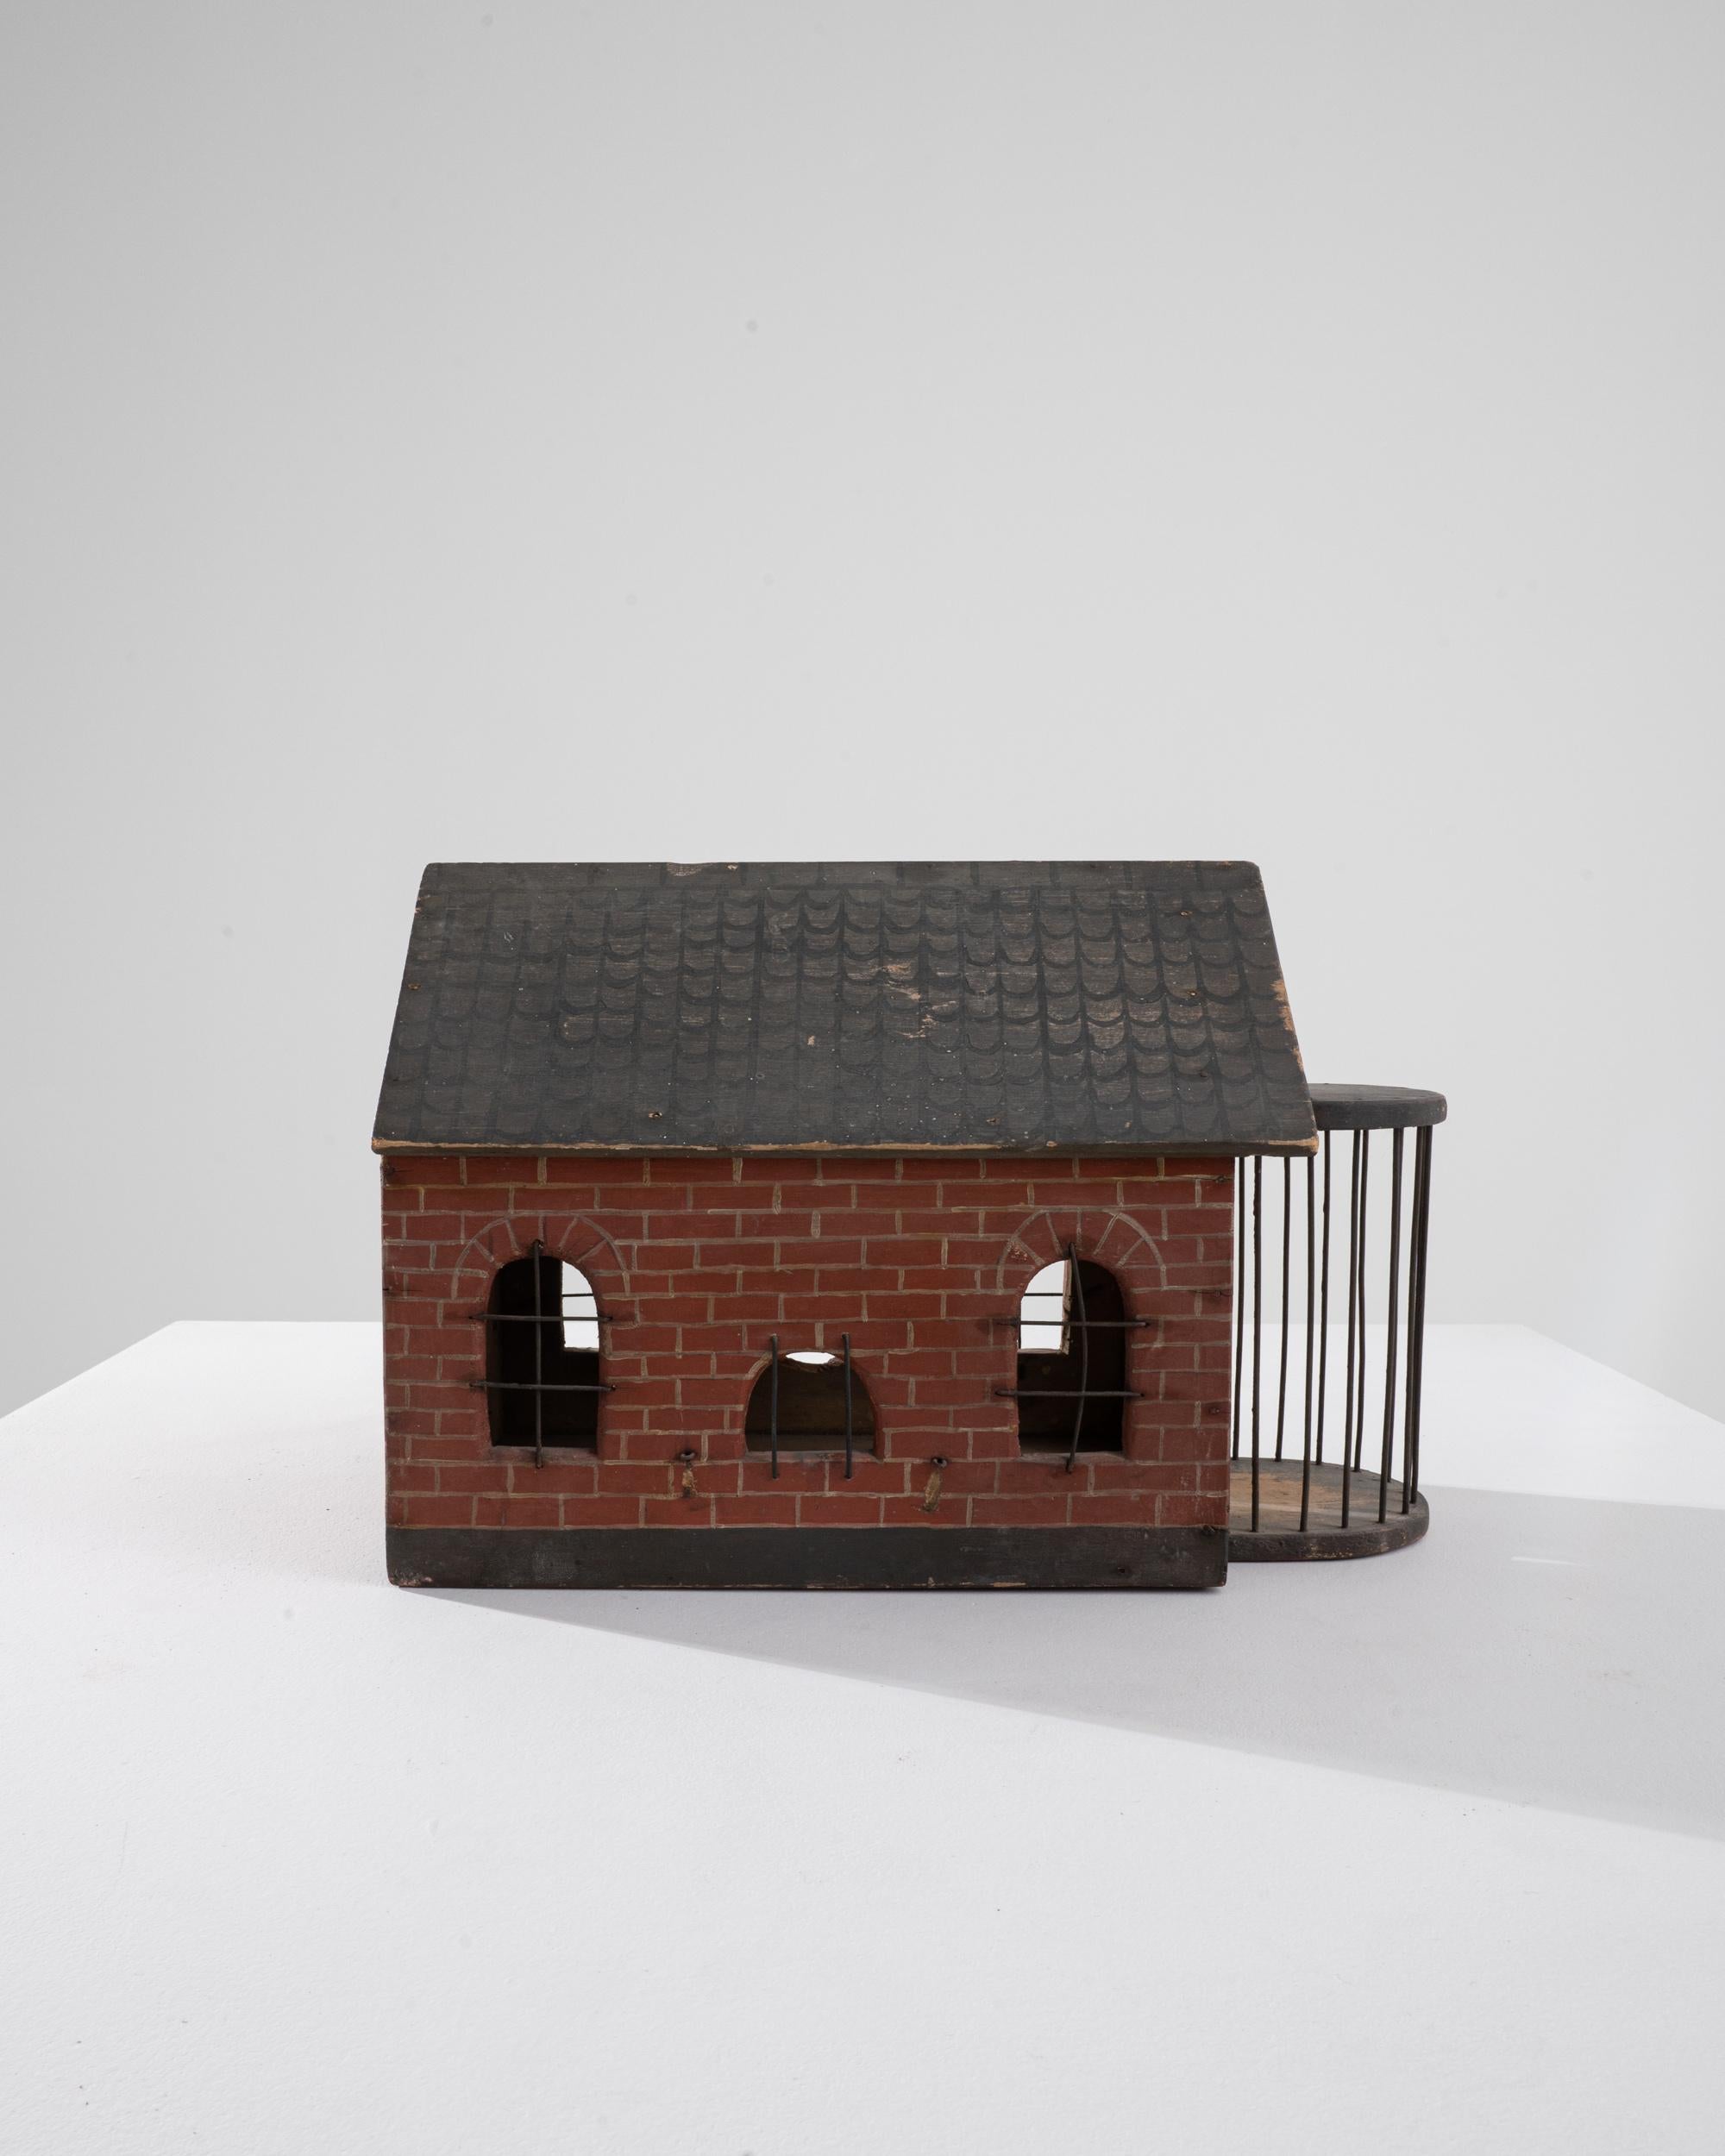 A wooden model made in early 20th century France. Puzzling in its purpose, but striking in its unique, hand-crafted character, this charming little building is sure to enliven the room in which it resides. Hand-painted brick walls and a tiled roof